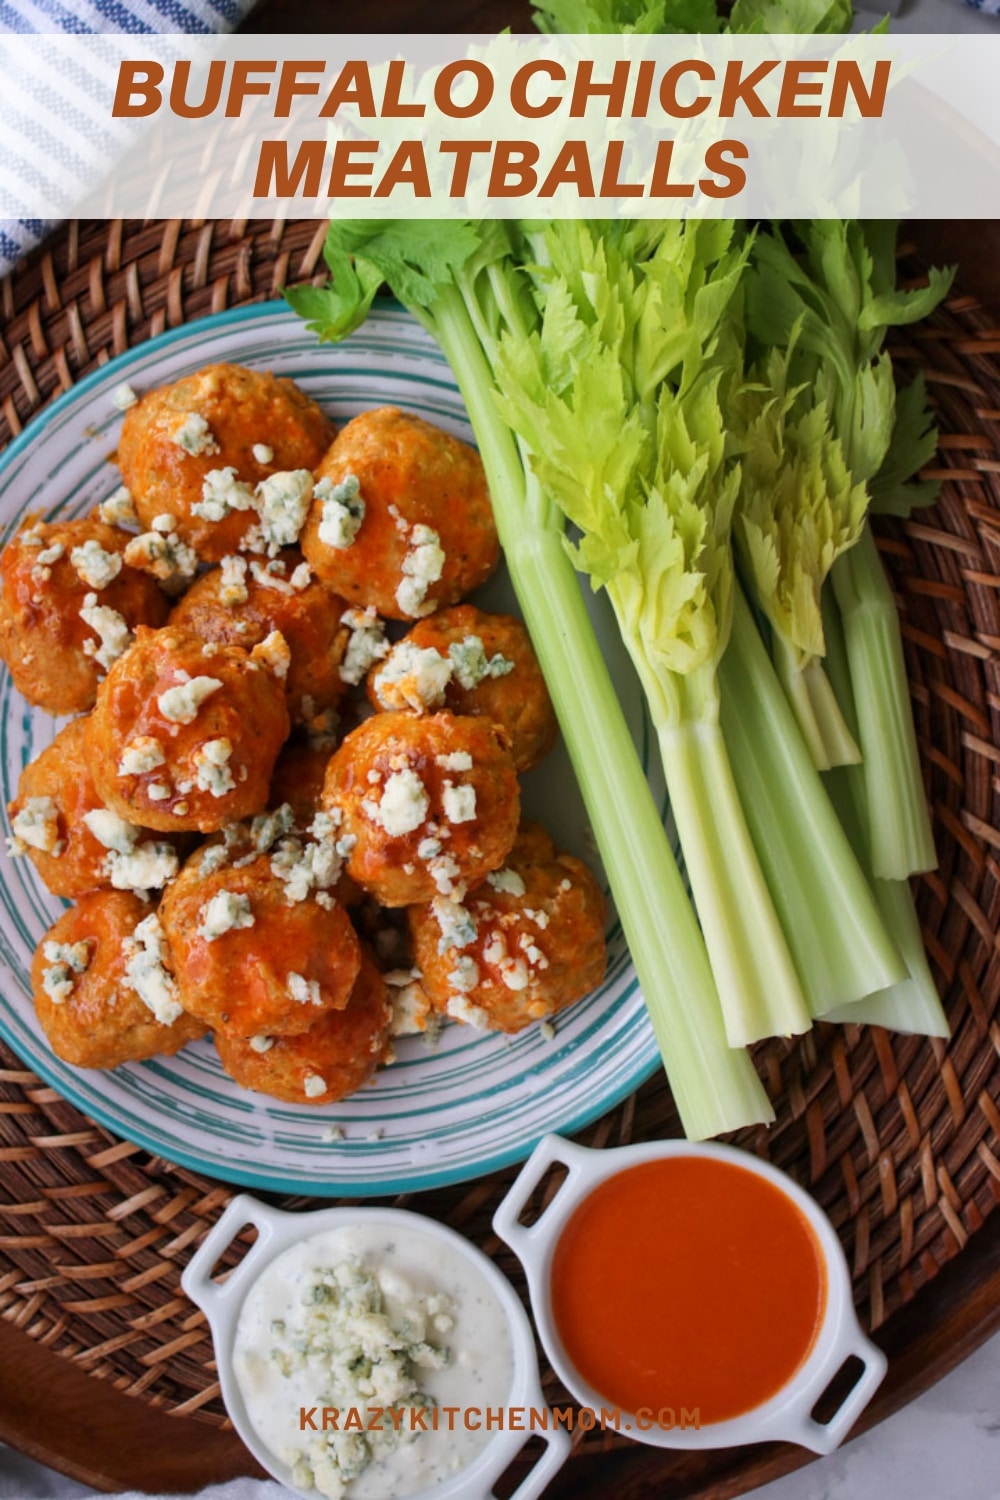 Buffalo chicken meatballs are a zesty, crowd-pleasing way to add a kick of flavor to any dish! With their tangy, spicy sauce, these bite-sized treats are sure to satisfy your cravings. via @krazykitchenmom